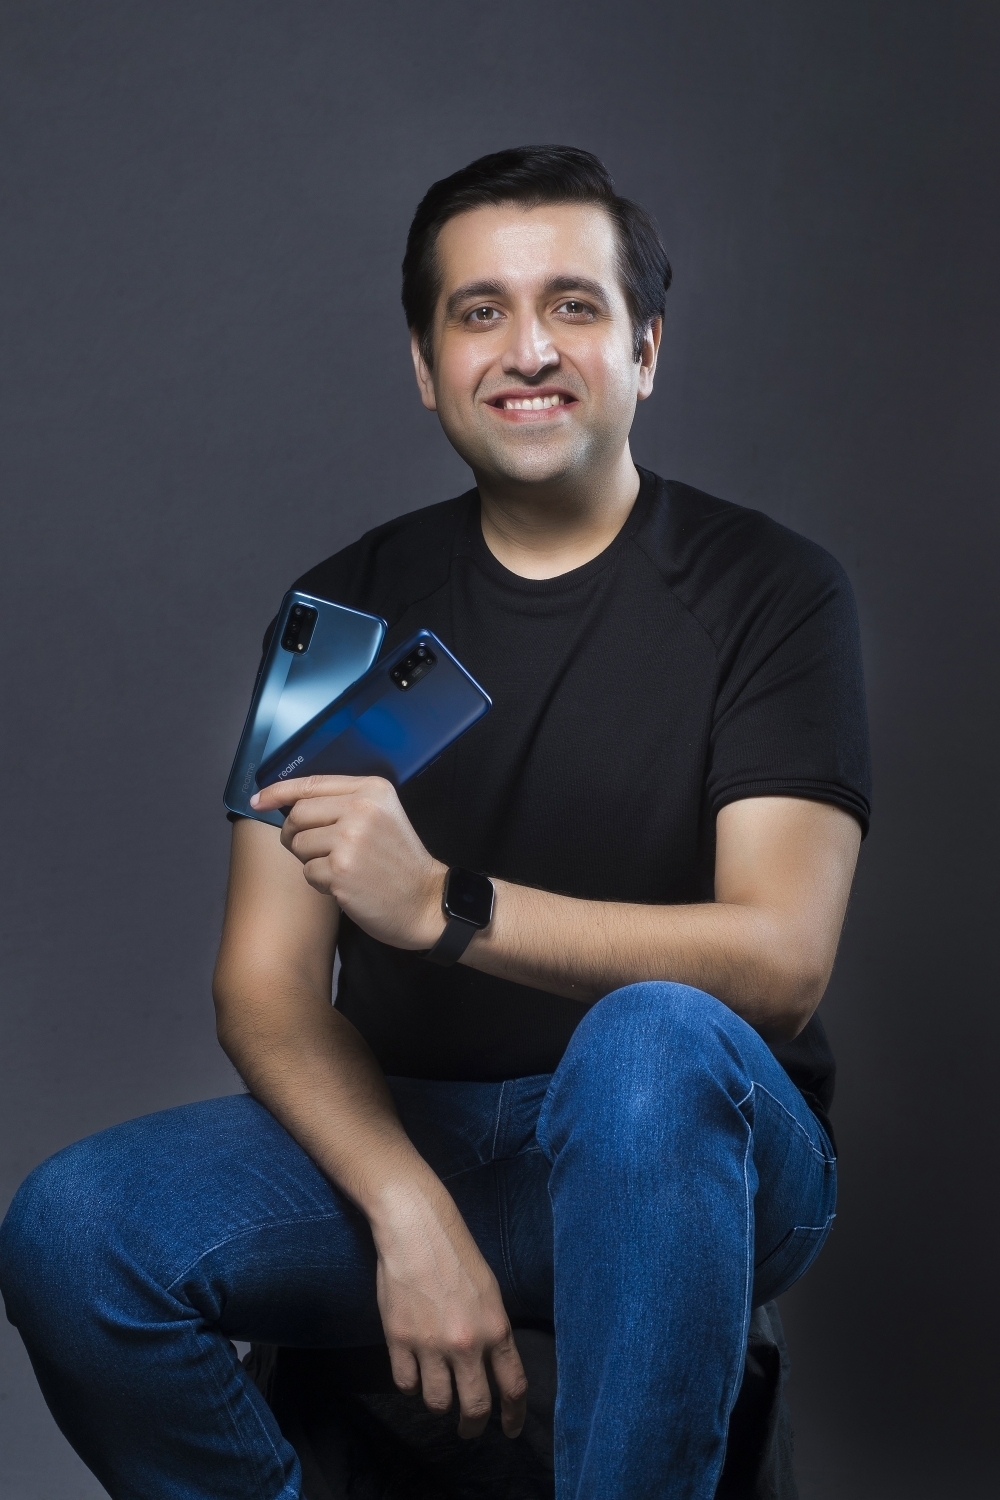 240W charging to kill anxiety among Indian smartphone users: realme's Madhav Sheth.